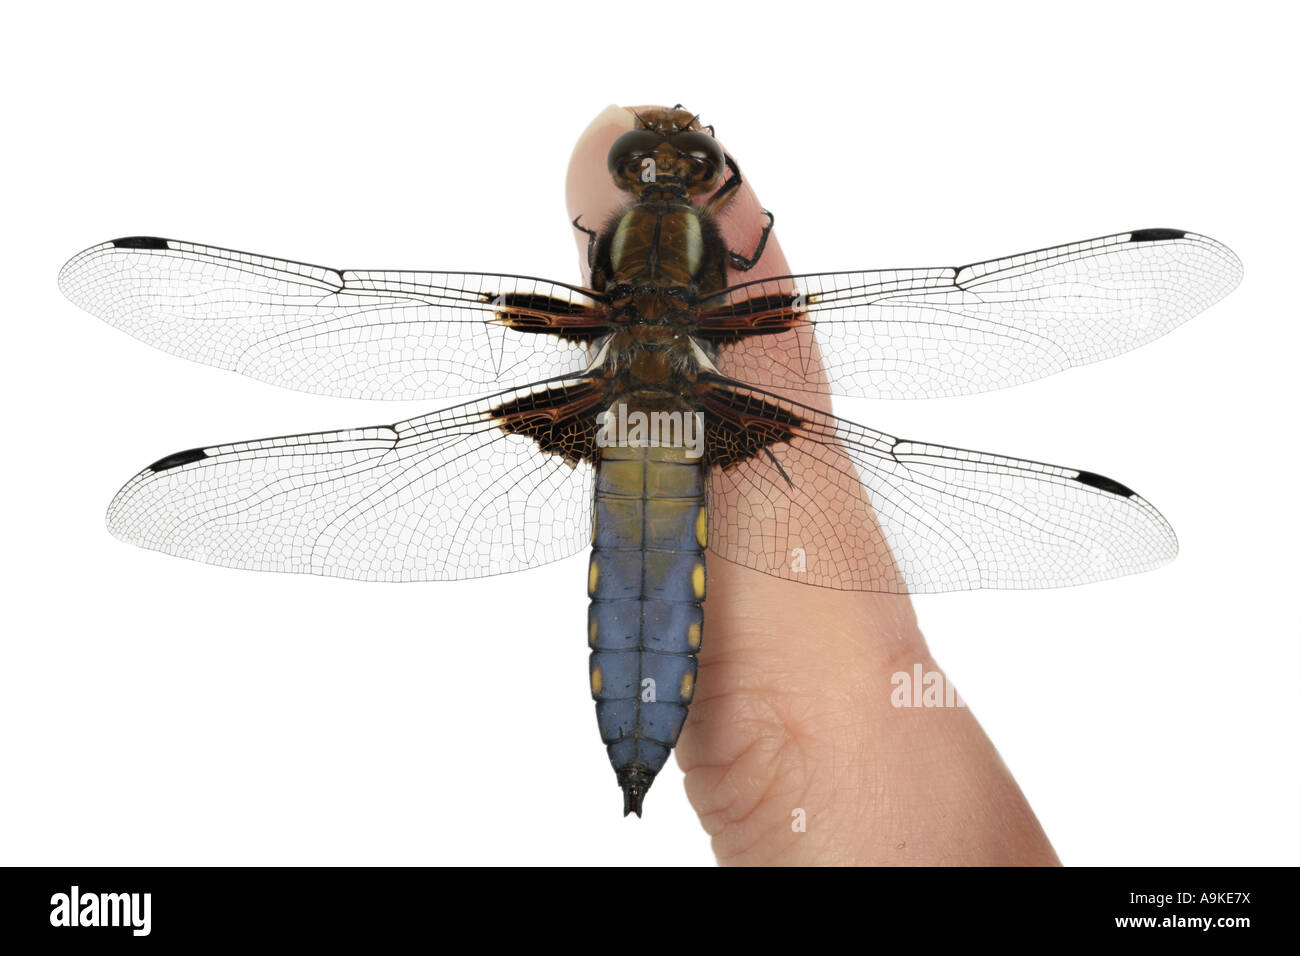 broad-bodied libellula, broad-bodied chaser (Libellula depressa), on index finger, Germany Stock Photo